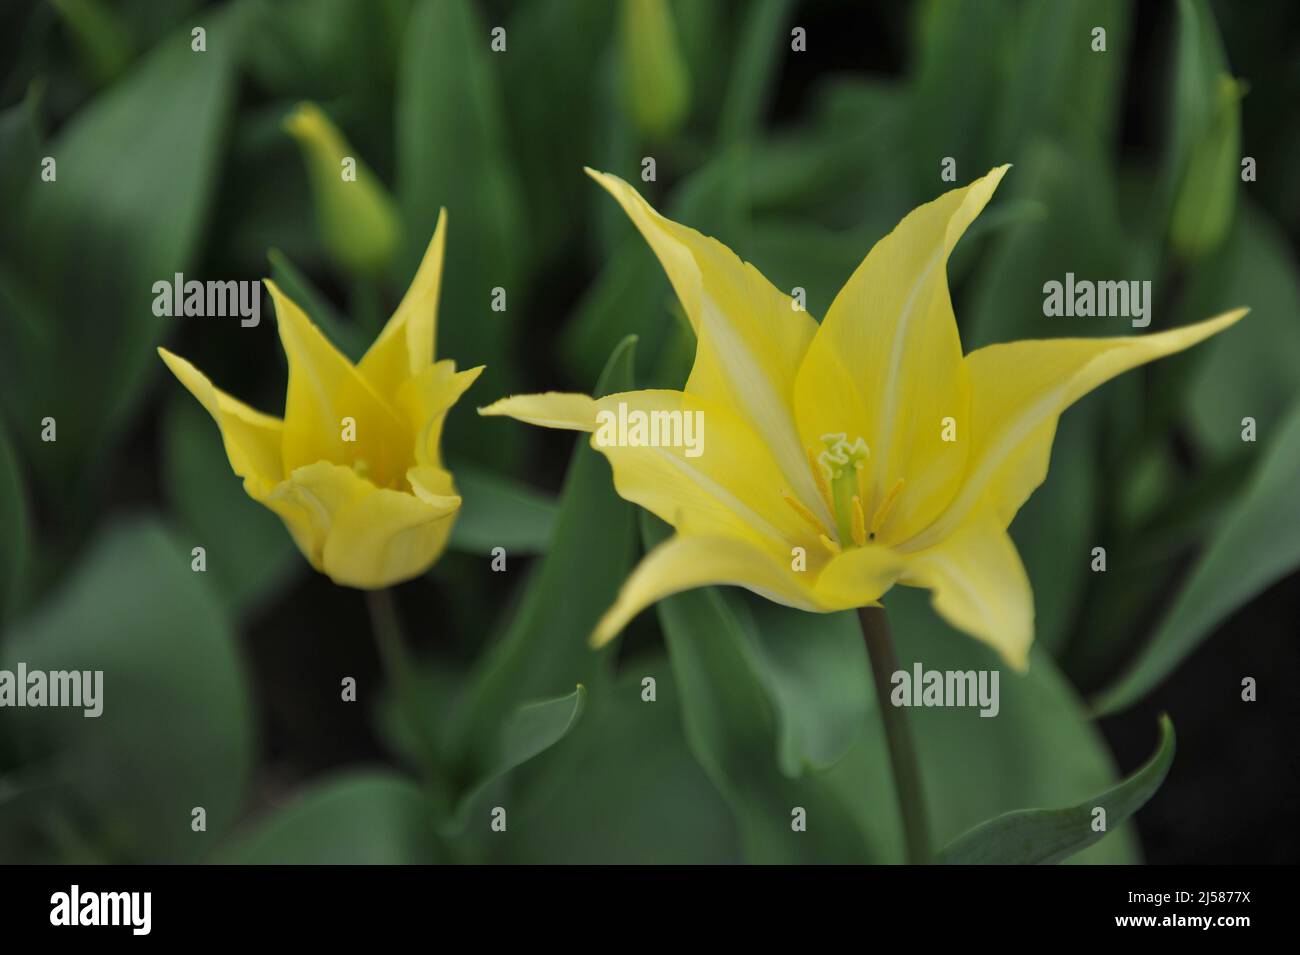 Yellow lily-flowered tulips (Tulipa) Florijn Chic bloom in a garden in March Stock Photo